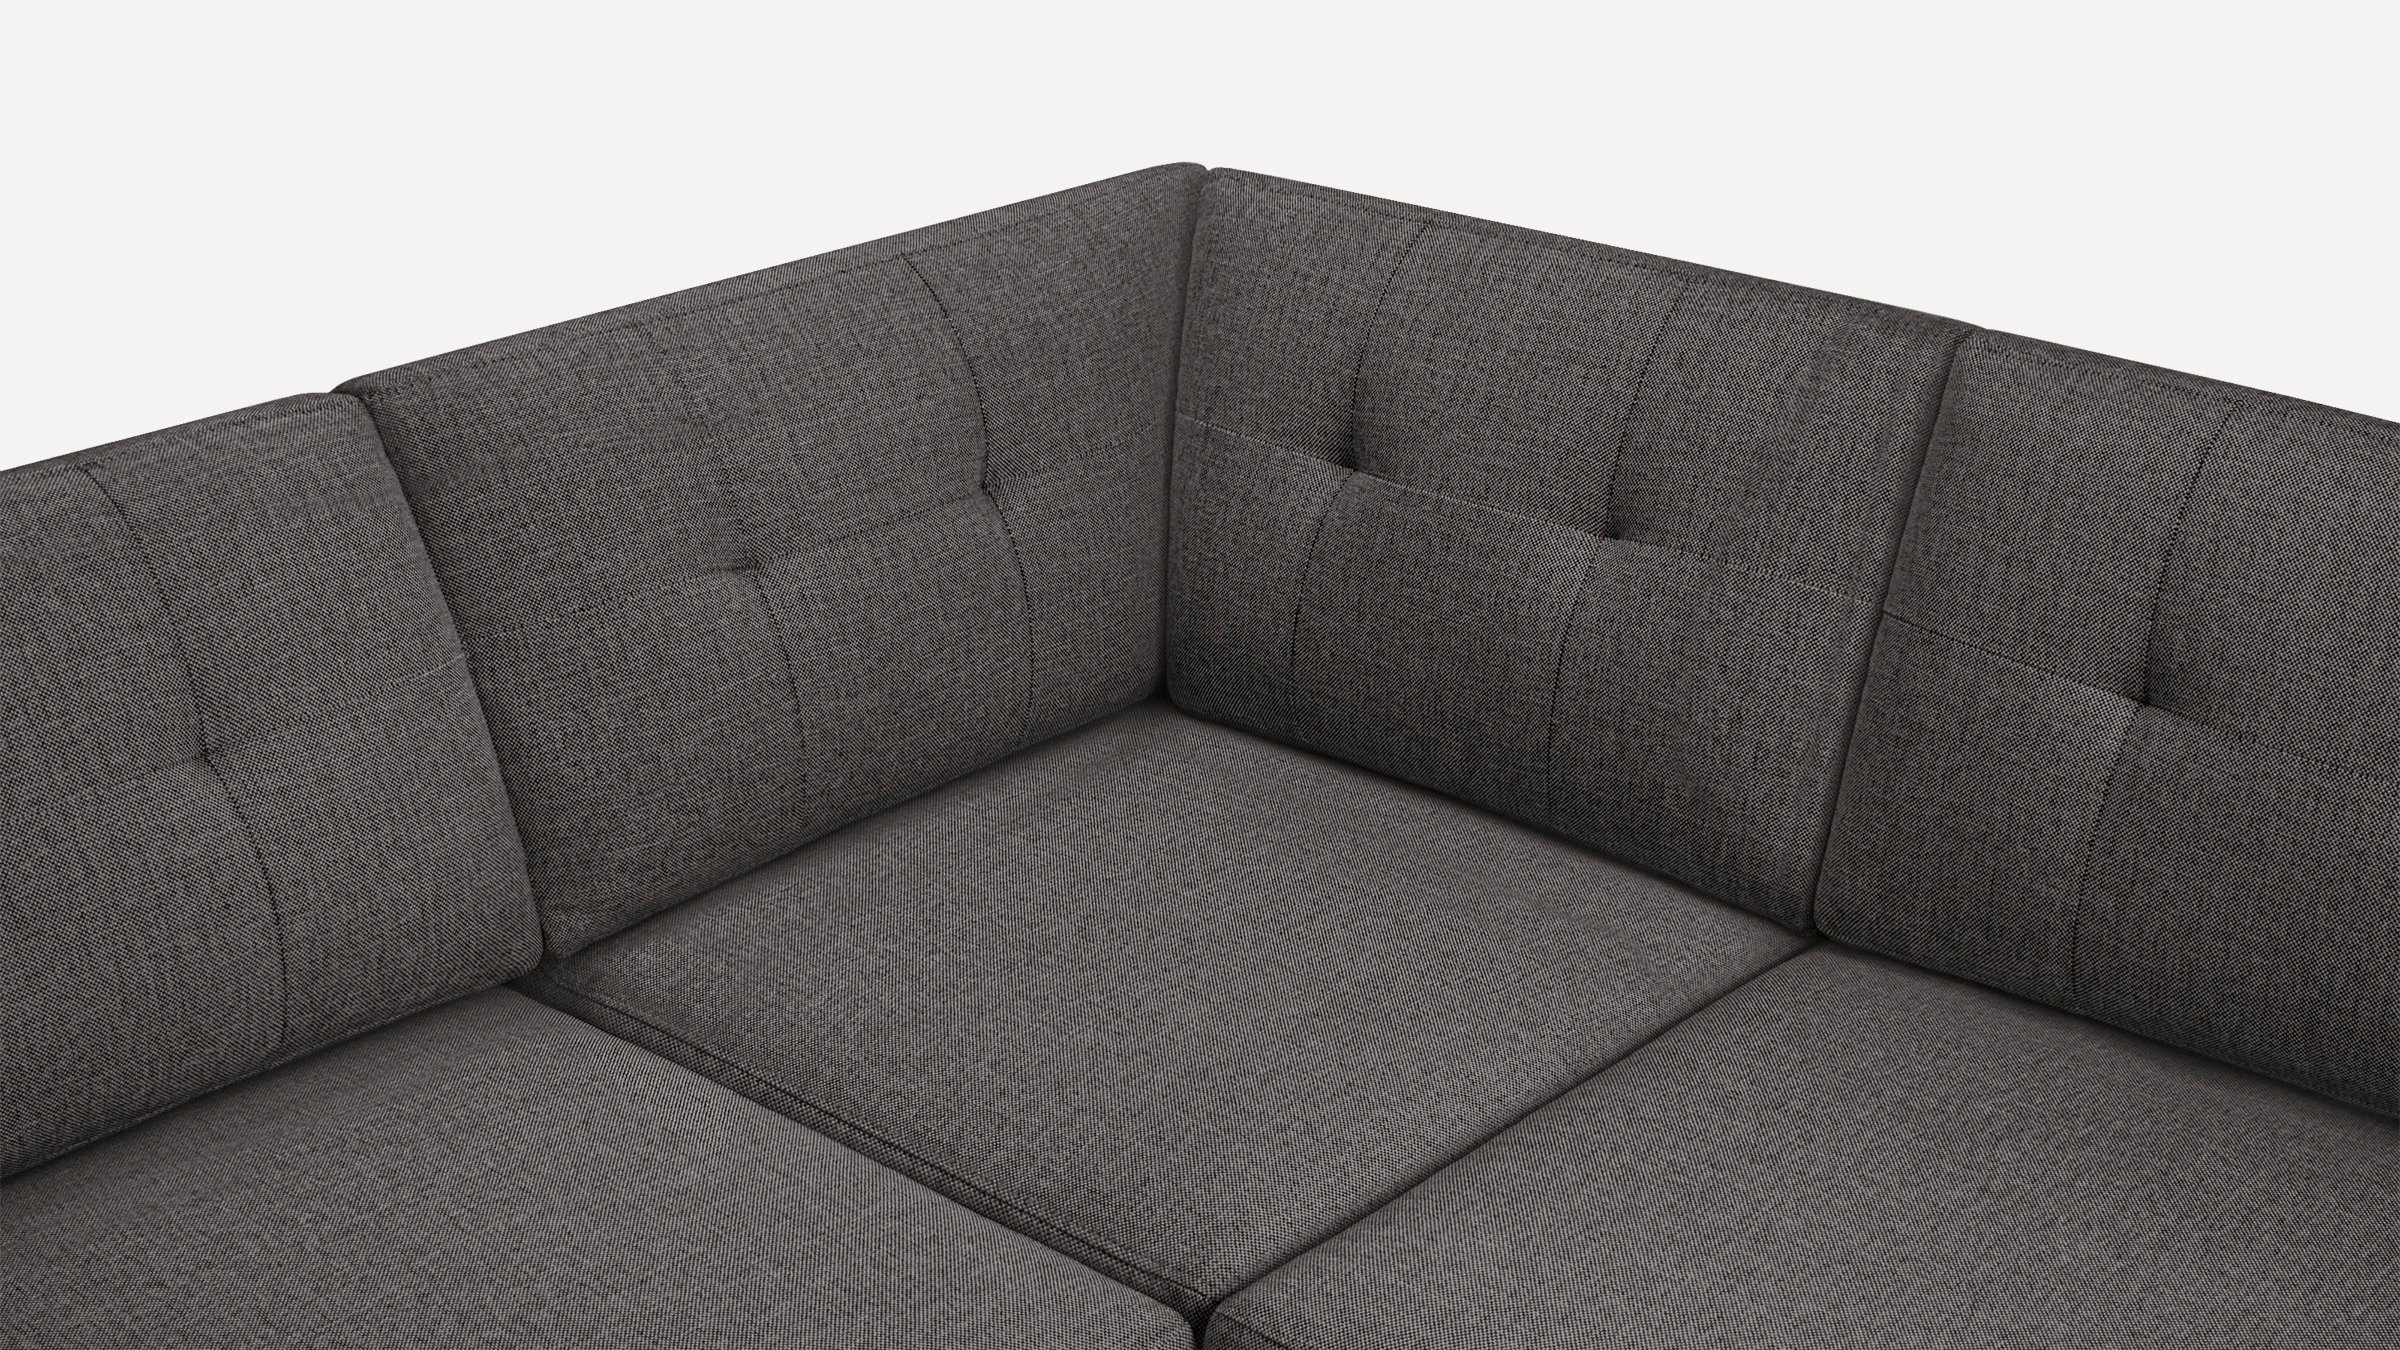 Nomad 6-Seat Corner Sectional with Chaise in Charcoal, Leg Finish: WalnutLegs - Image 2